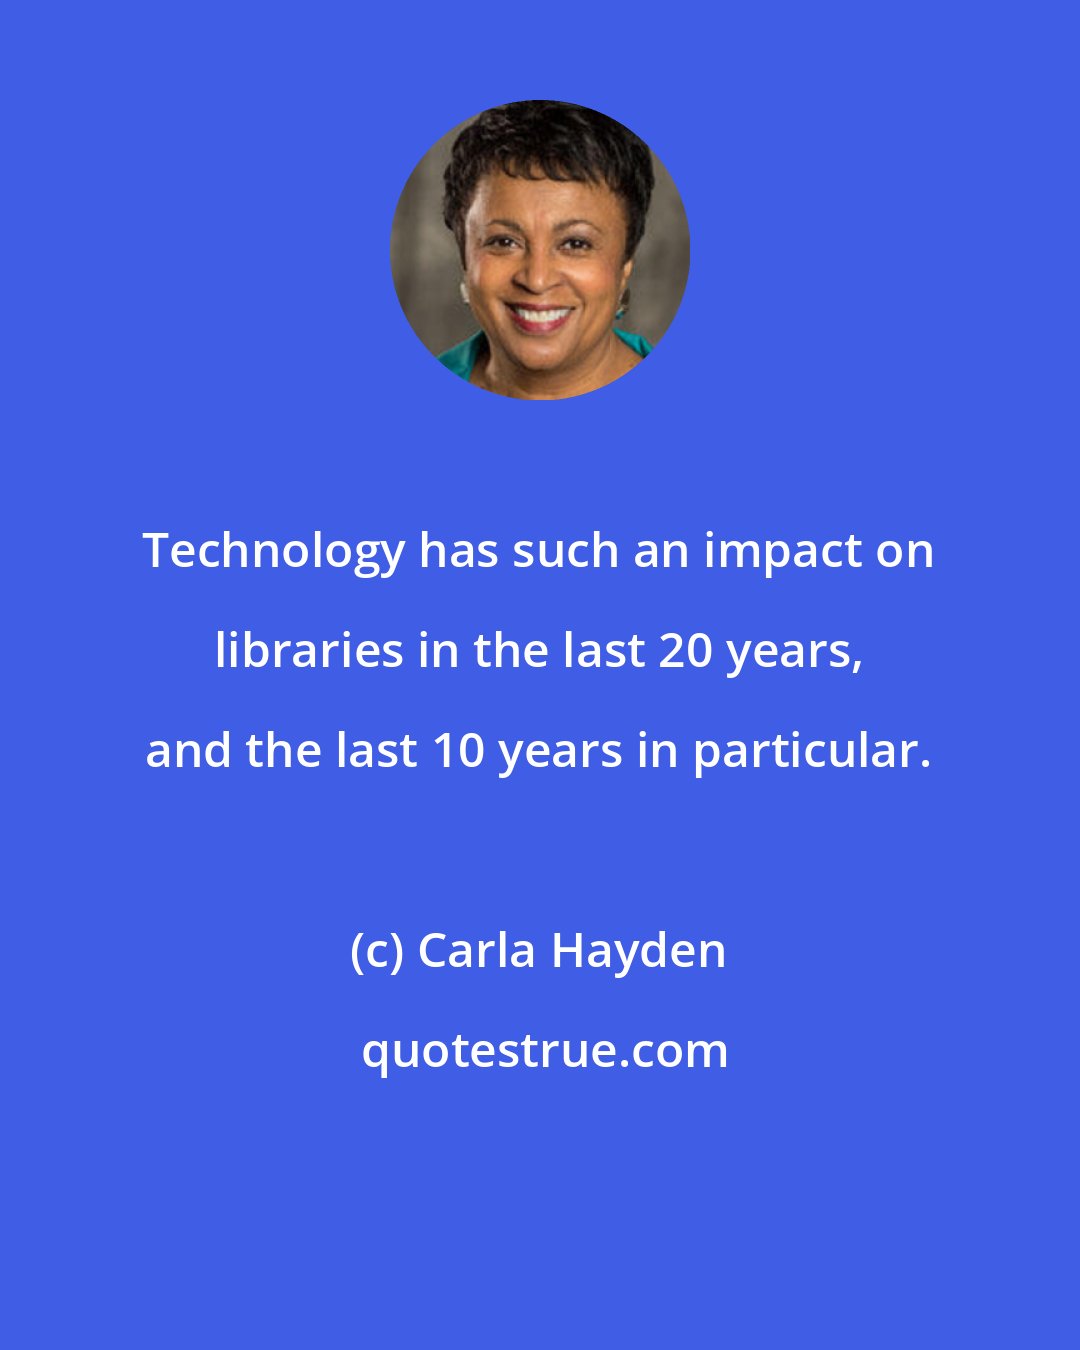 Carla Hayden: Technology has such an impact on libraries in the last 20 years, and the last 10 years in particular.